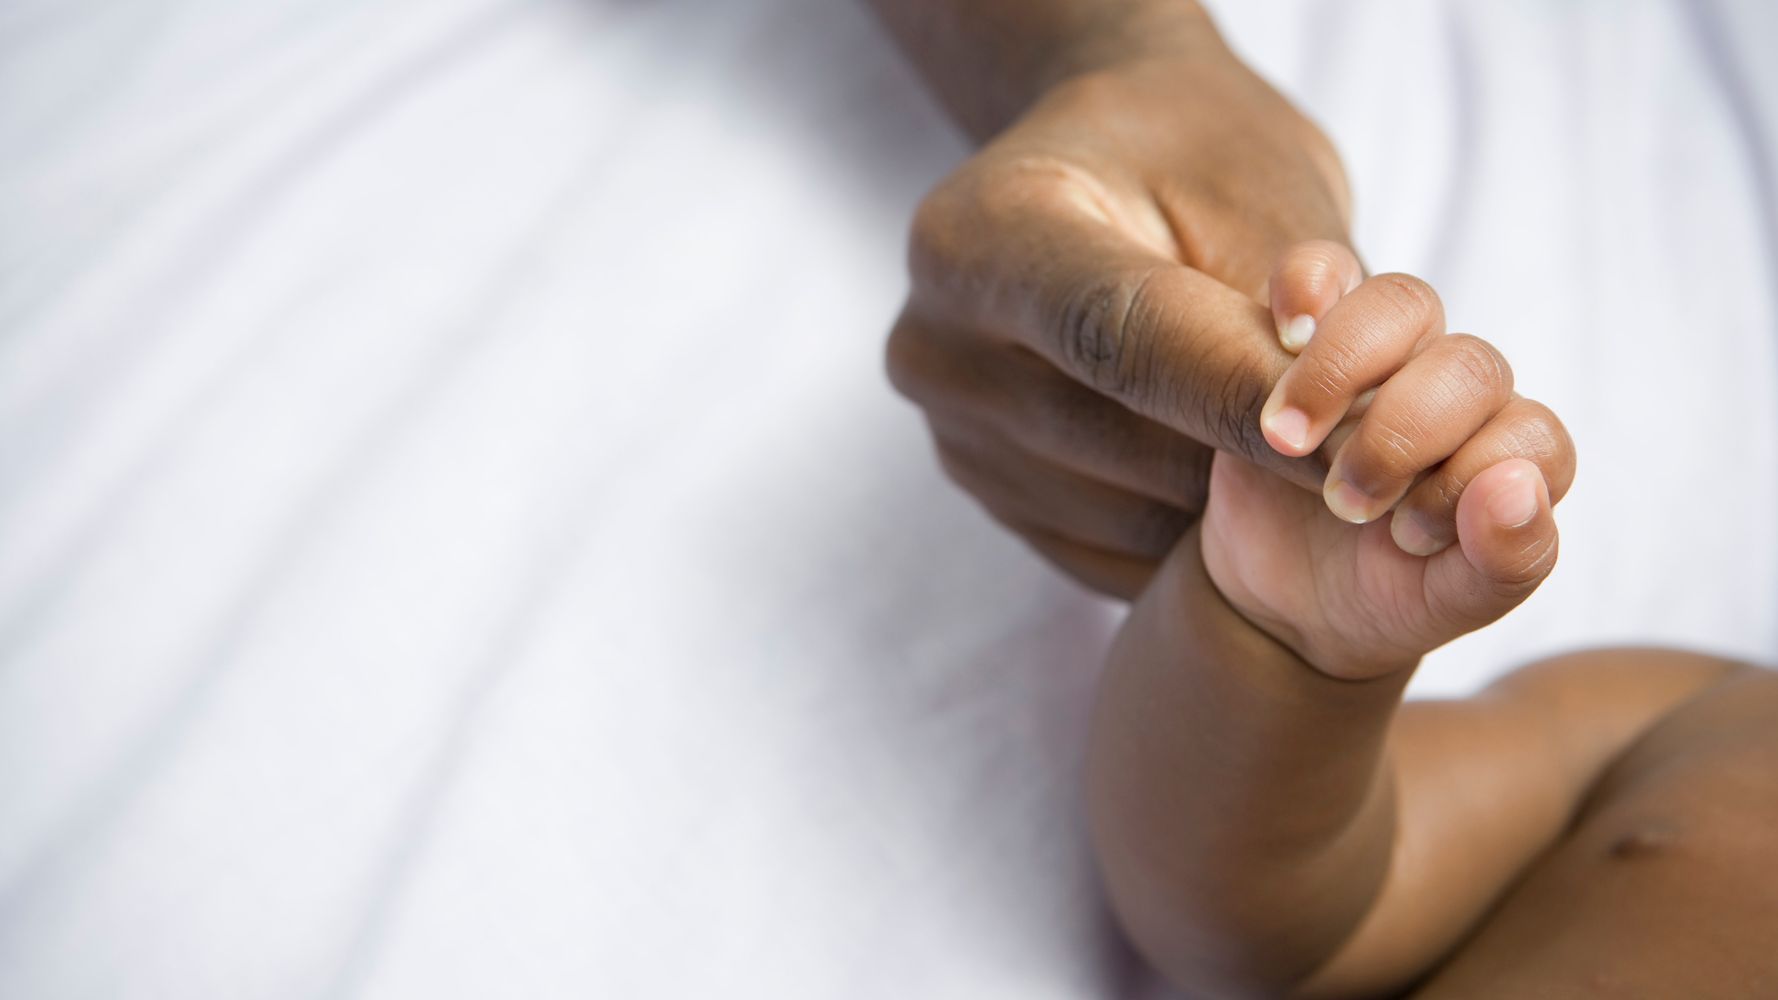 Baby hand being held by adult